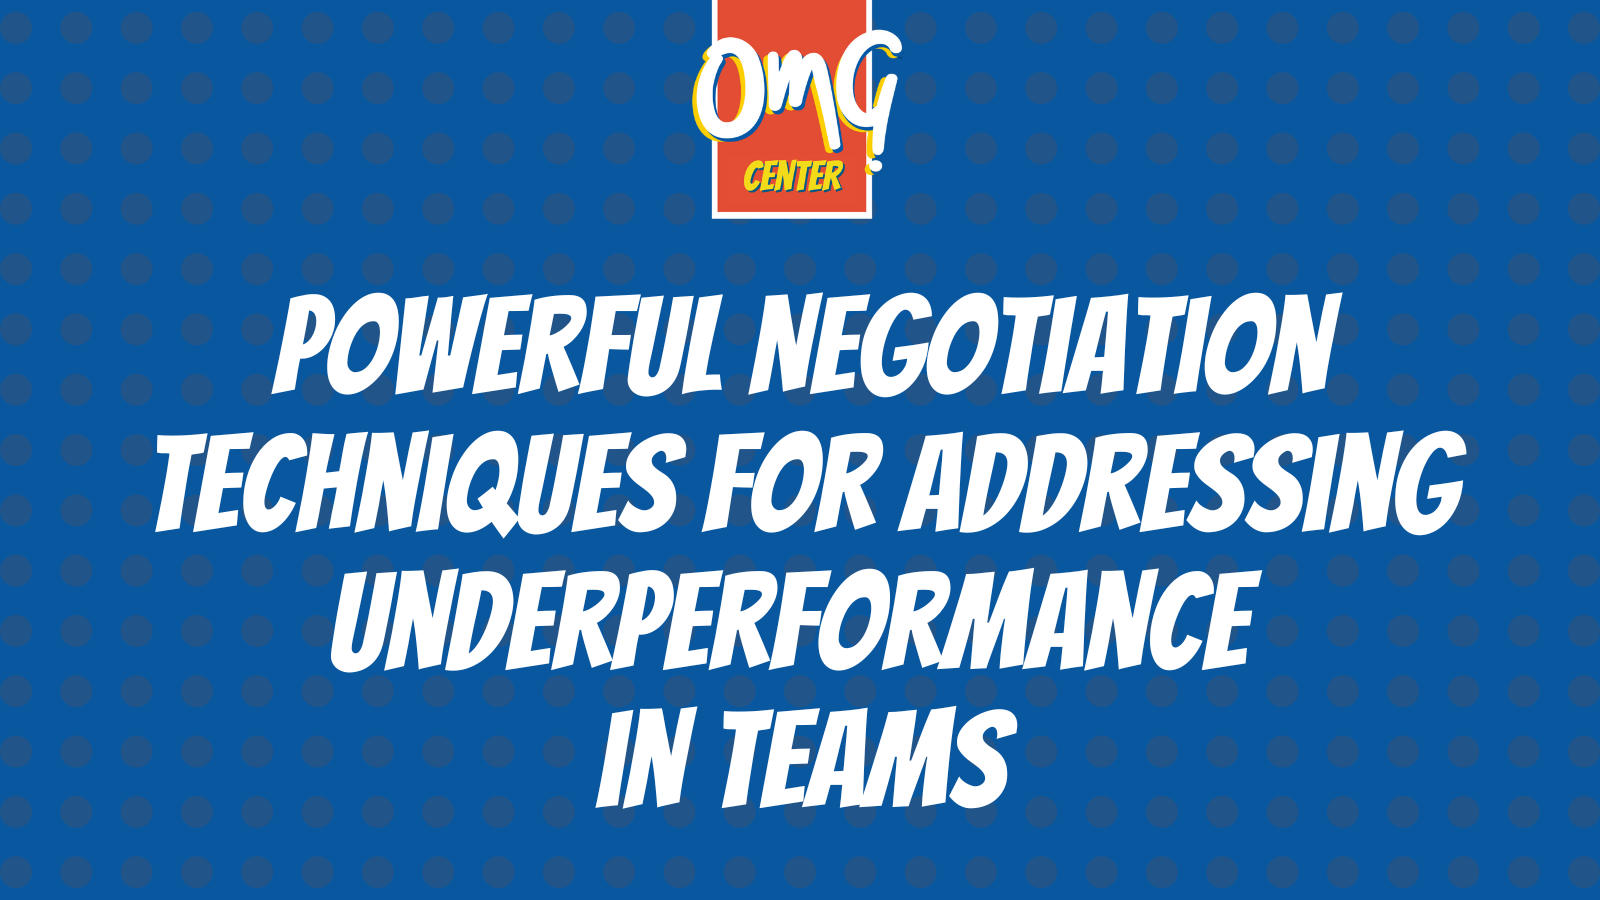 The OMG Center - Powerful Negotiation Techniques for Addressing Underperformance in Teams - Twitter